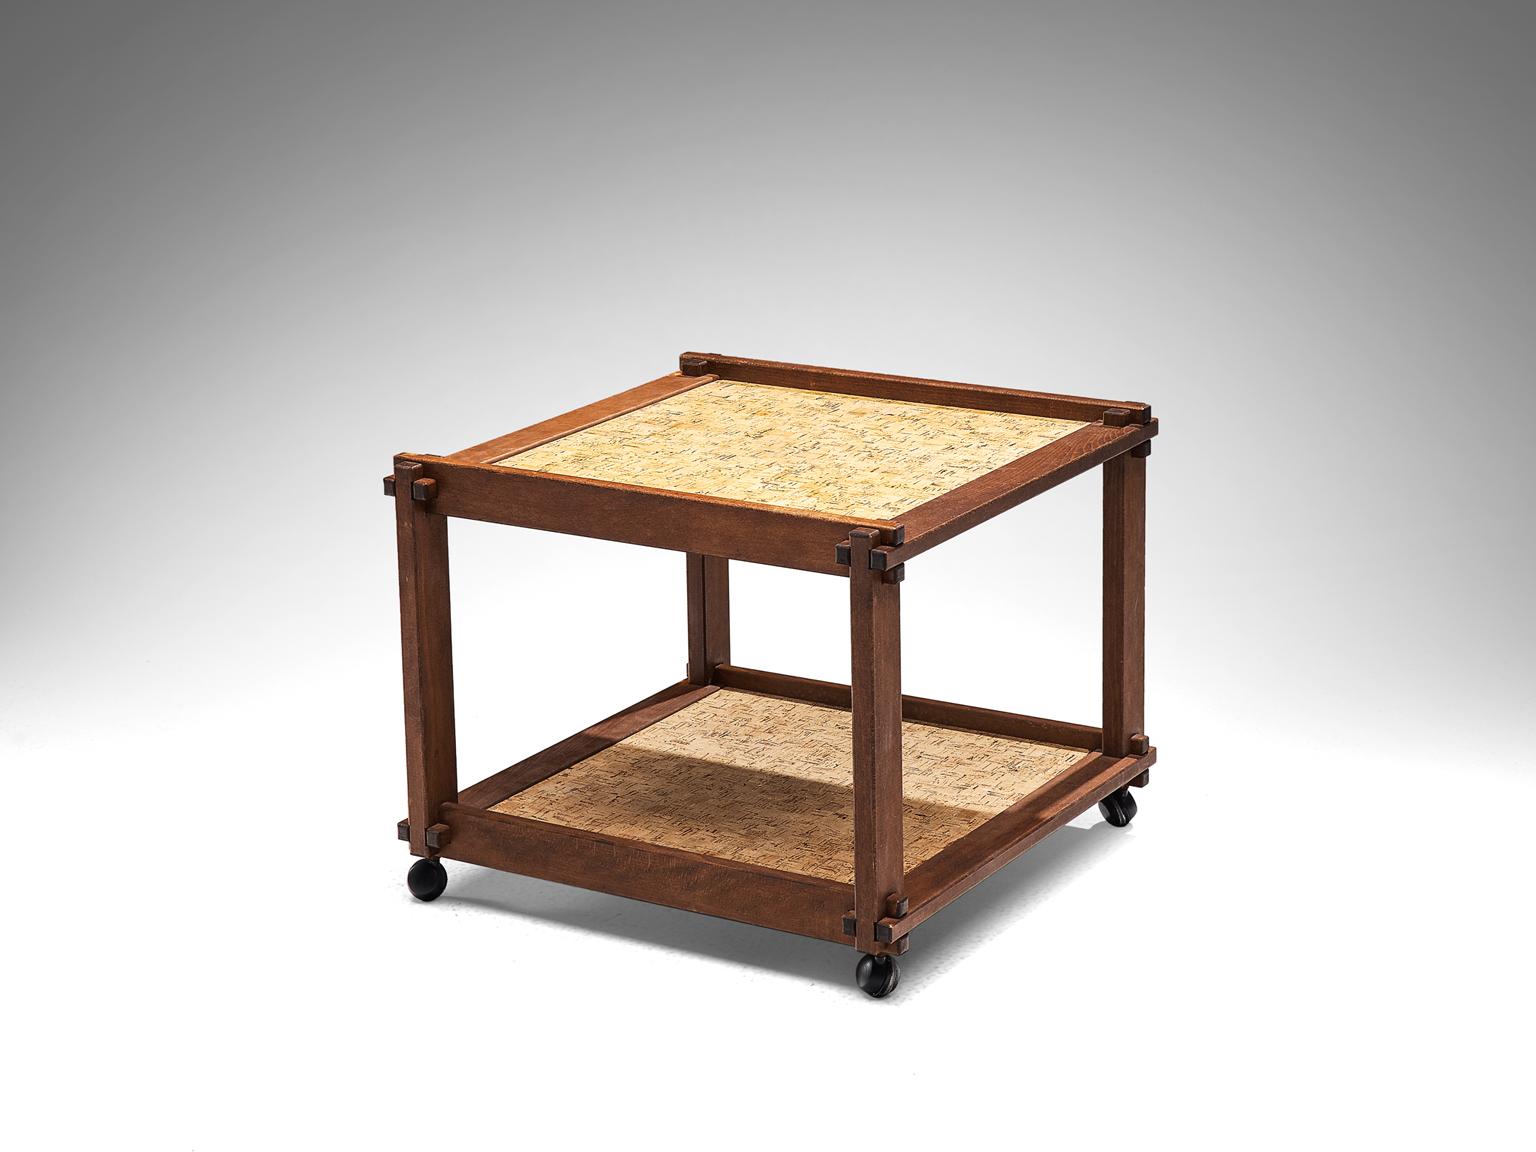 Trolley, cork and wood, France, 1950s.

This solid bar cart has been executed with a cork top and a cork bottom shelve. The piece has a solid wooden frame that has patinated over time and forms a warm, striking contrast to the cork elements. The